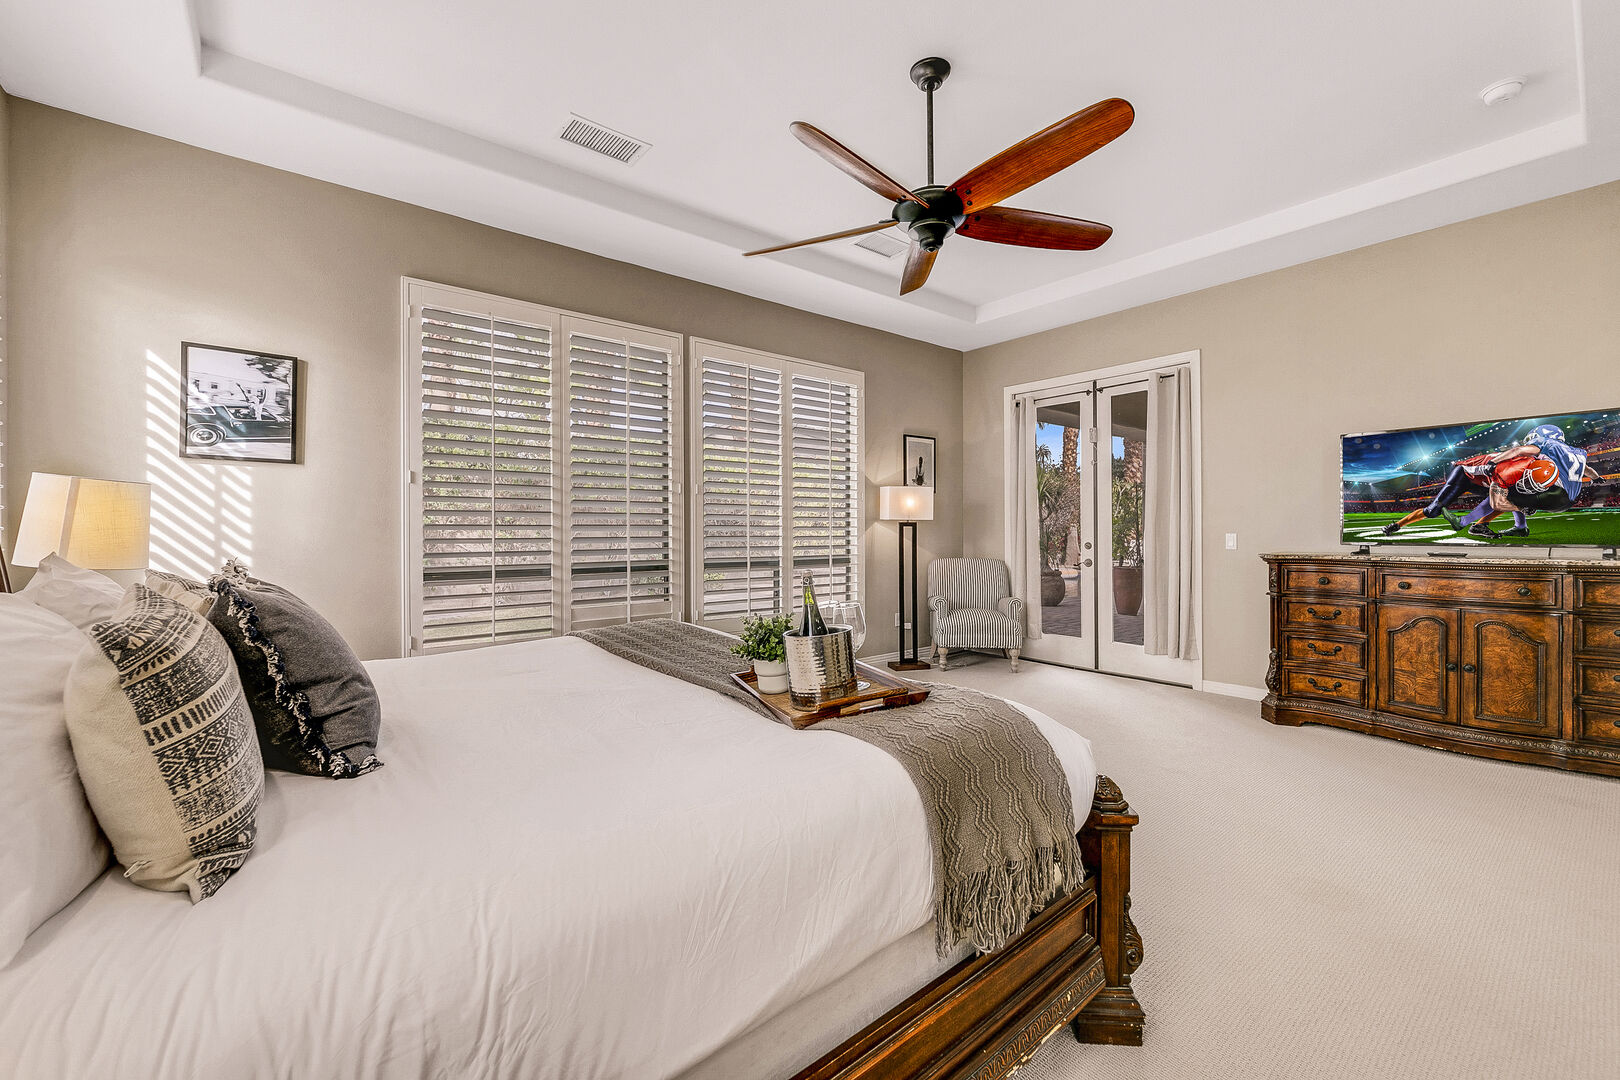 This master bedroom features a LARGE walk-in closet with access to the back patio.